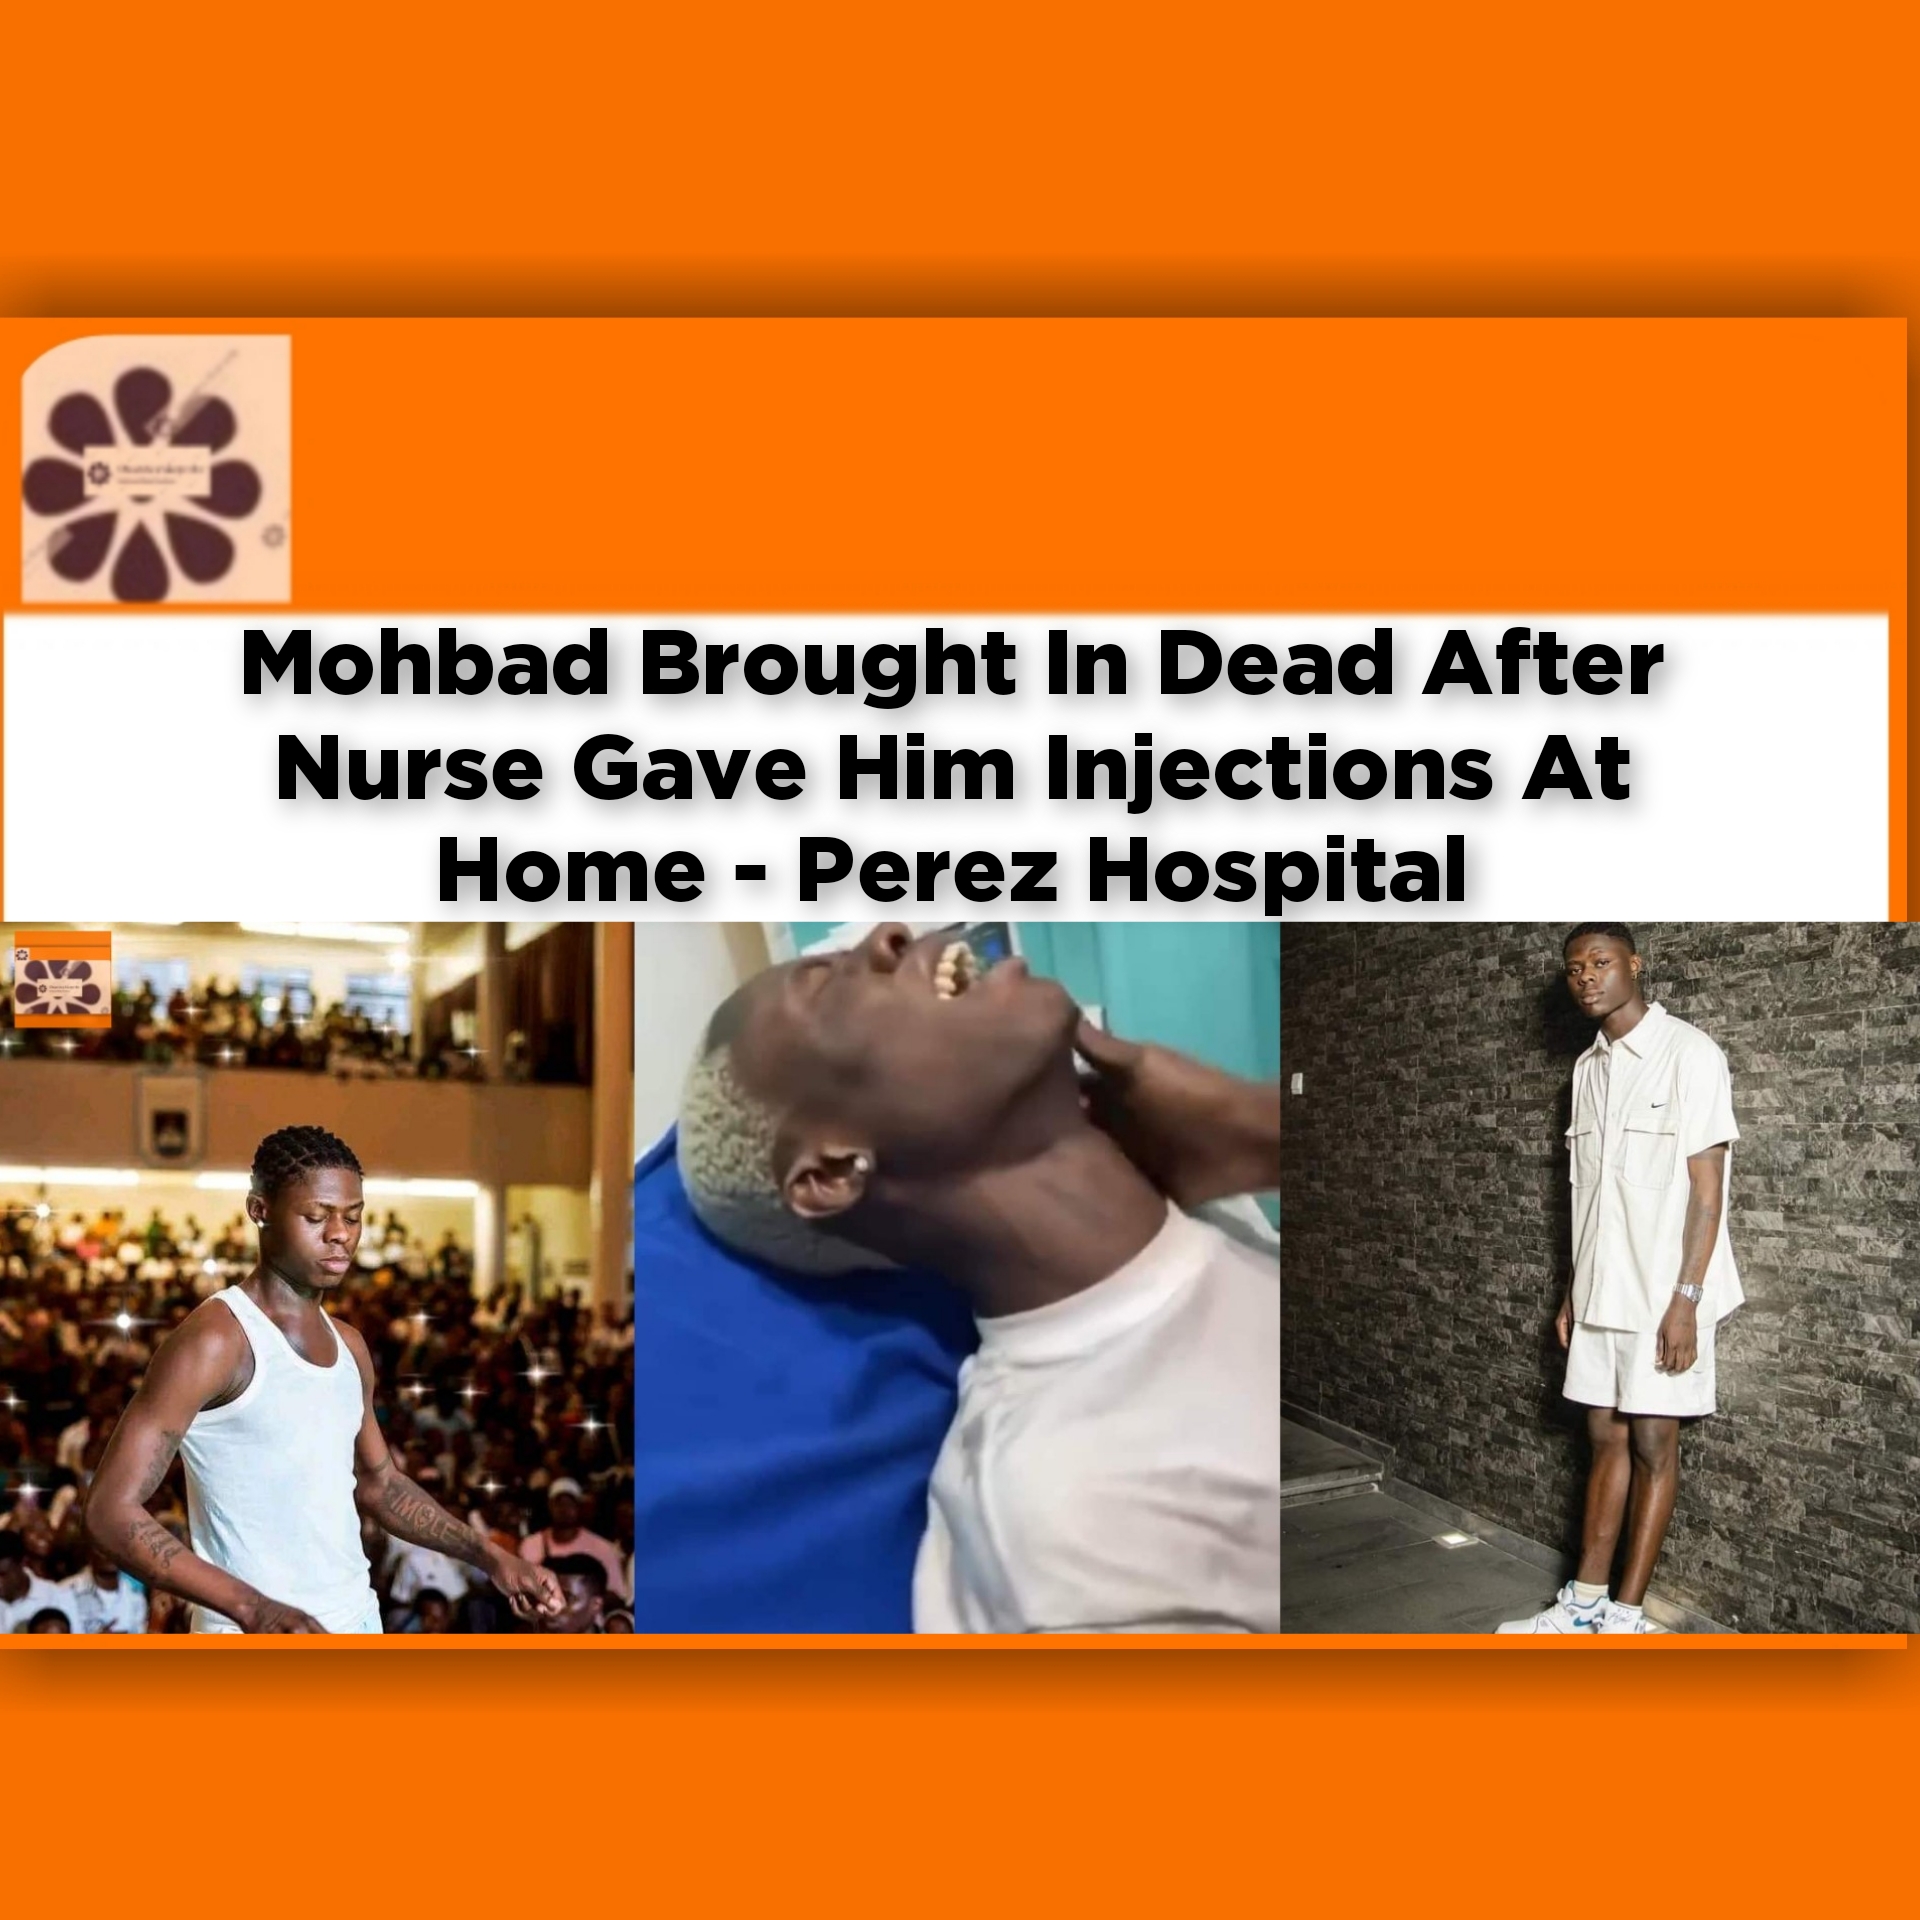 Mohbad Brought In Dead After Nurse Gave Him Injections At Home - Perez Hospital ~ OsazuwaAkonedo #Kanu